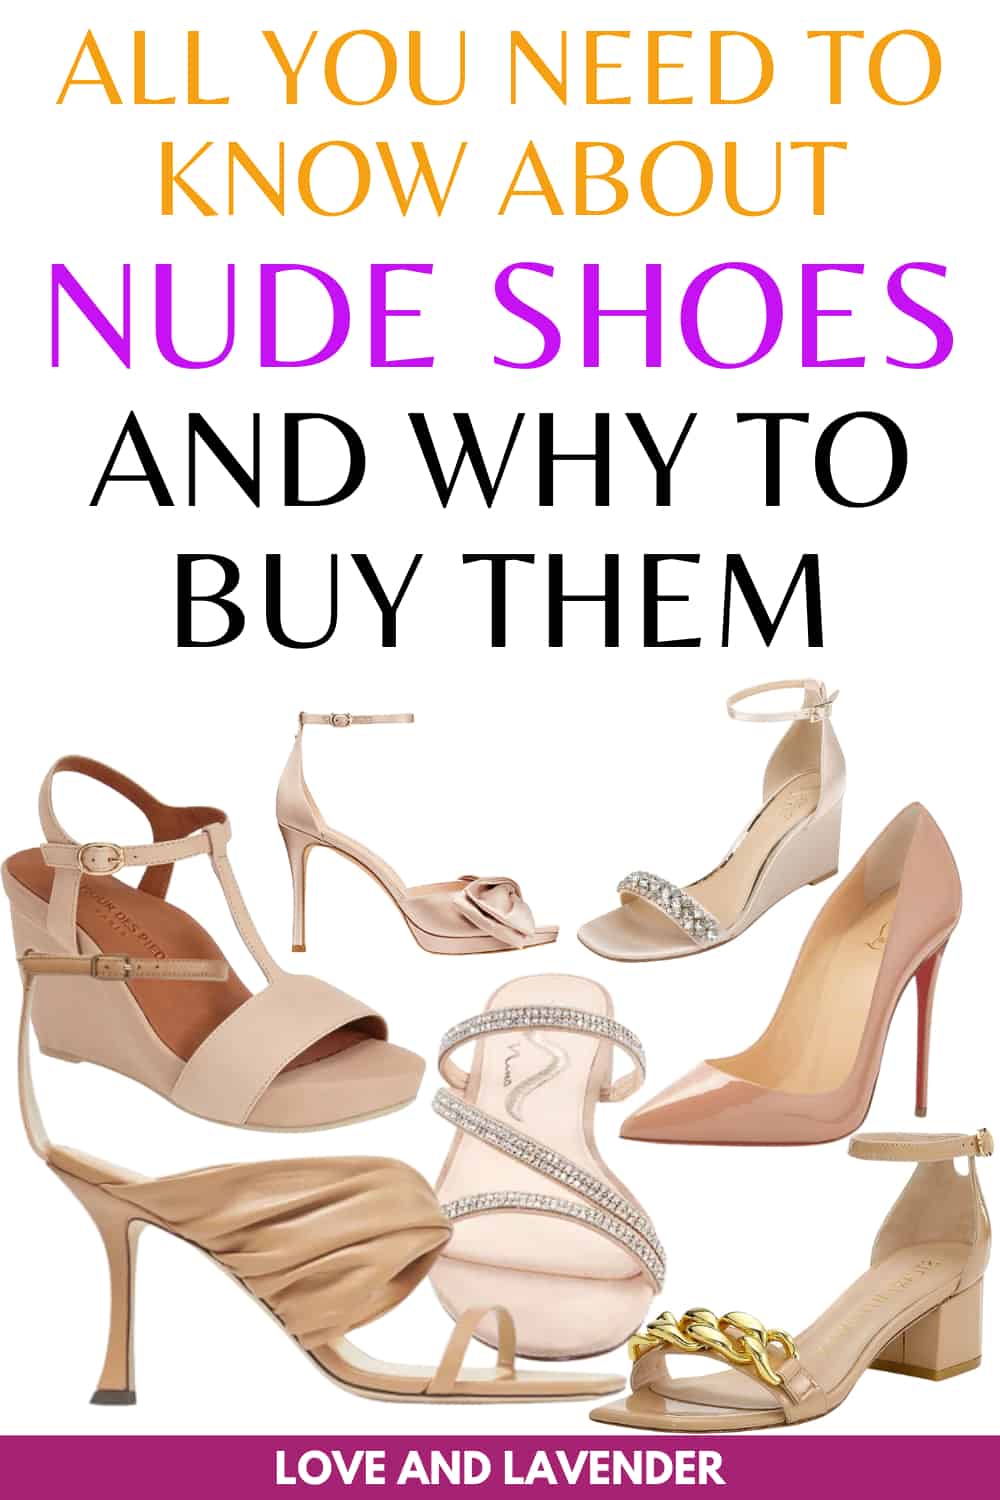 Nude Shoes for Brides on a Budget - Pinterest Pin